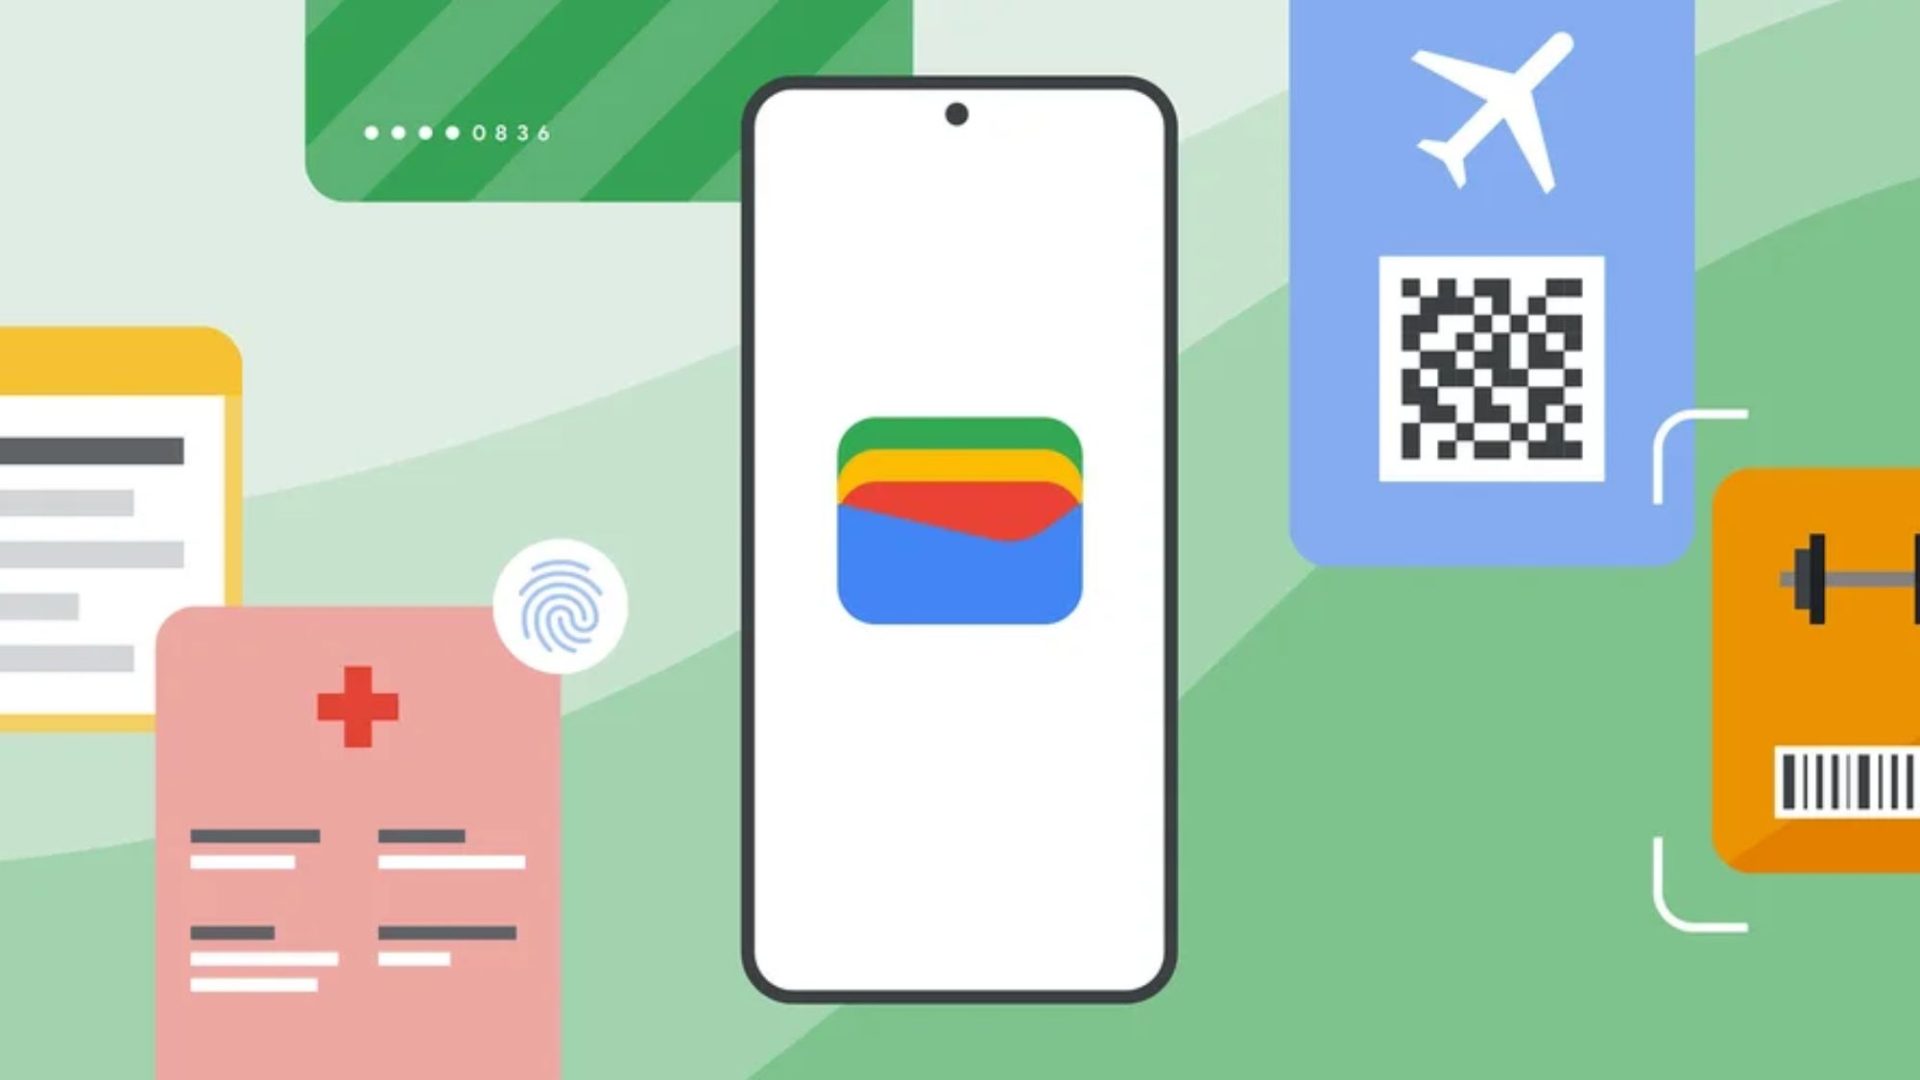 The Google Wallet campaign continues with the addition of 30 new banks in the United States.